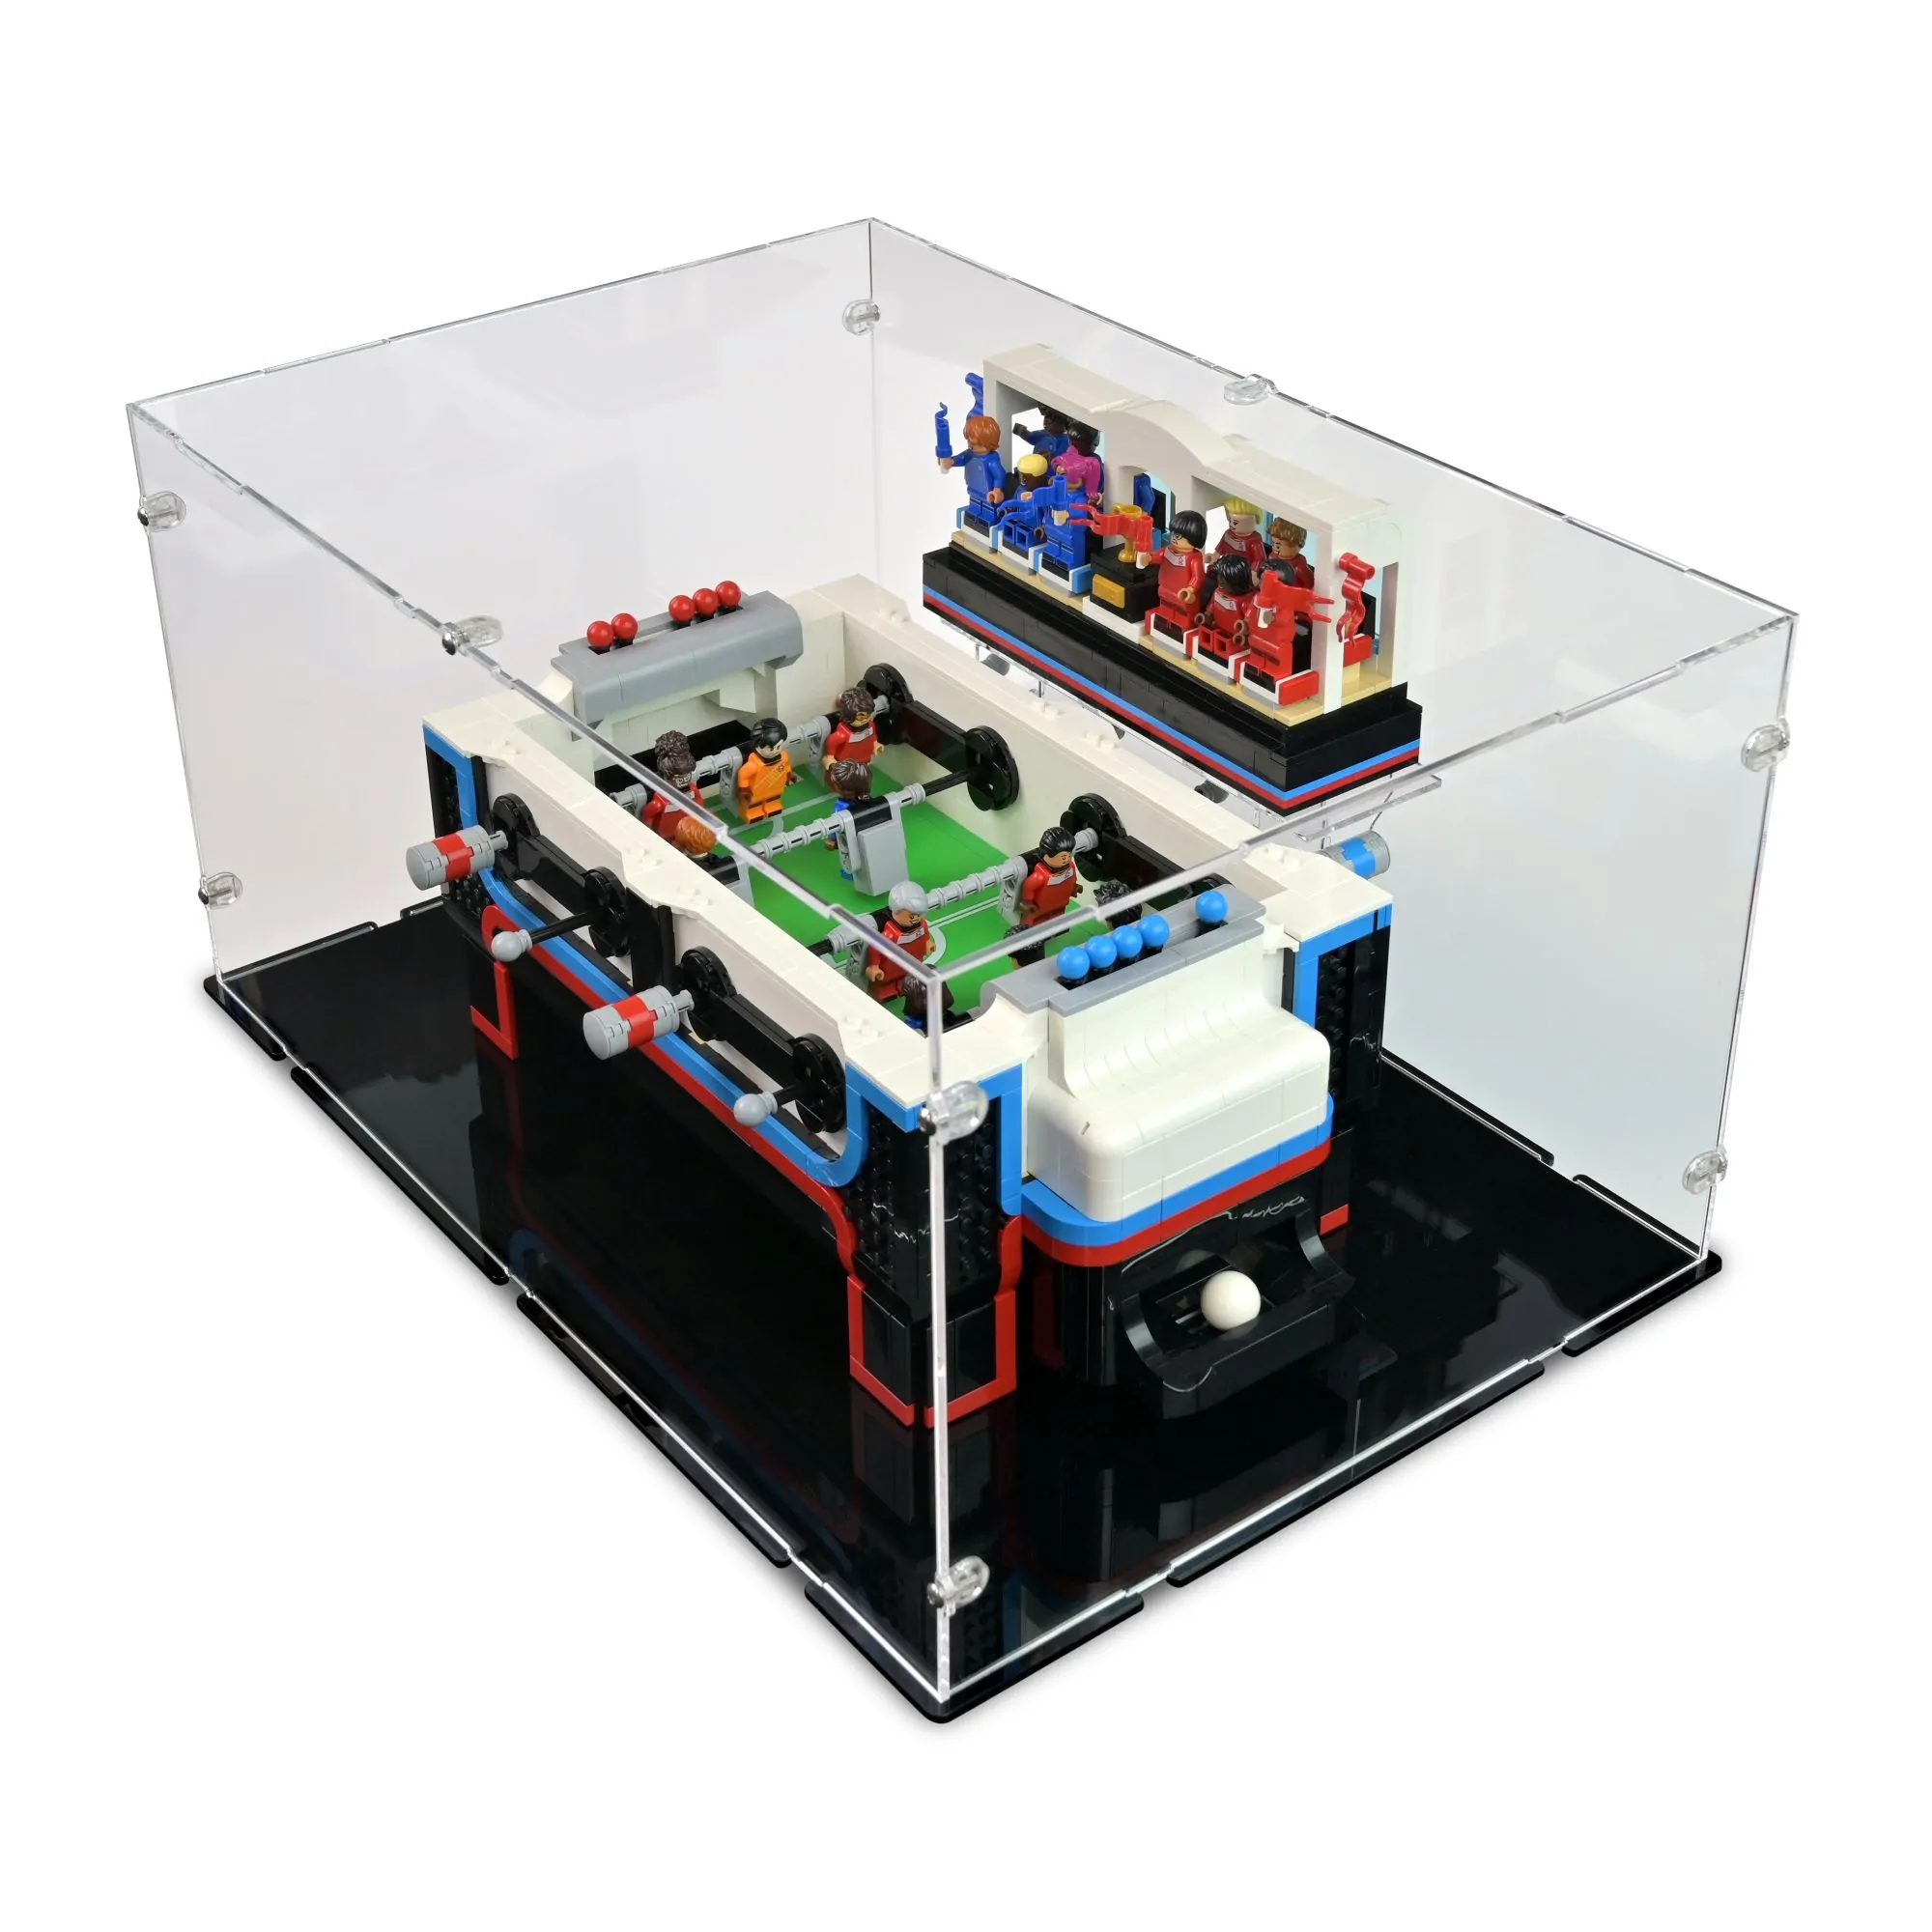 https://www.idisplayit.com/images/detailed/87/lego-21337-table-football-display-case03-1.webp